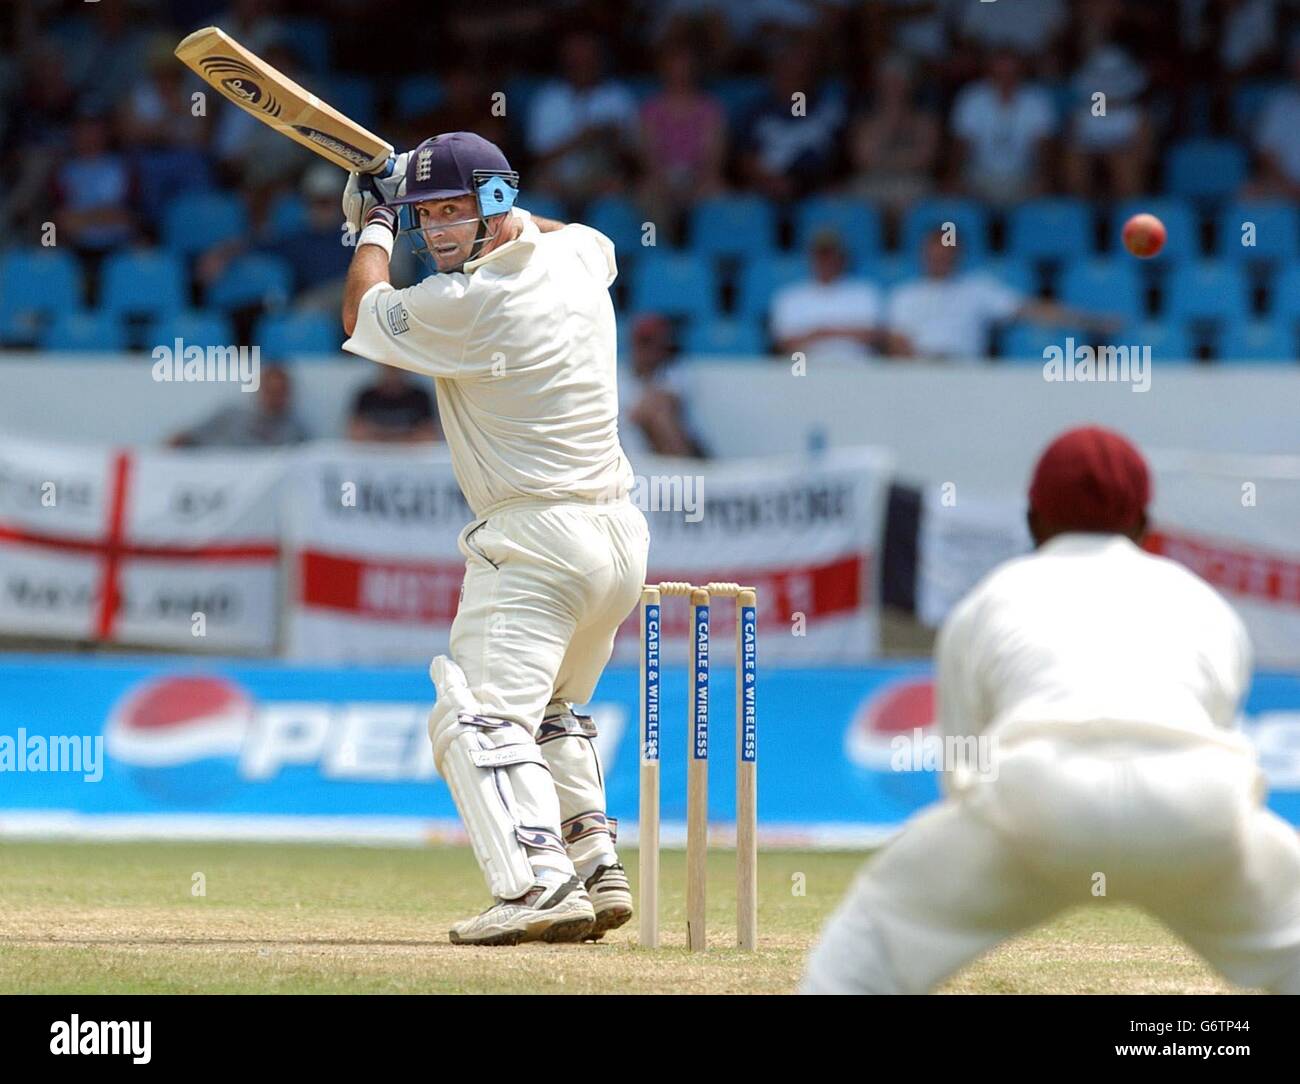 England batsman Graham Thorpe (left) edges the ball to West Indies fielder Chris Gayle off the bowling of Pedro Collin to be dismissed for 90 runs, during the fourth day of the second Test match at the Queen's Park Oval, Port of Spain, Trinidad. Stock Photo